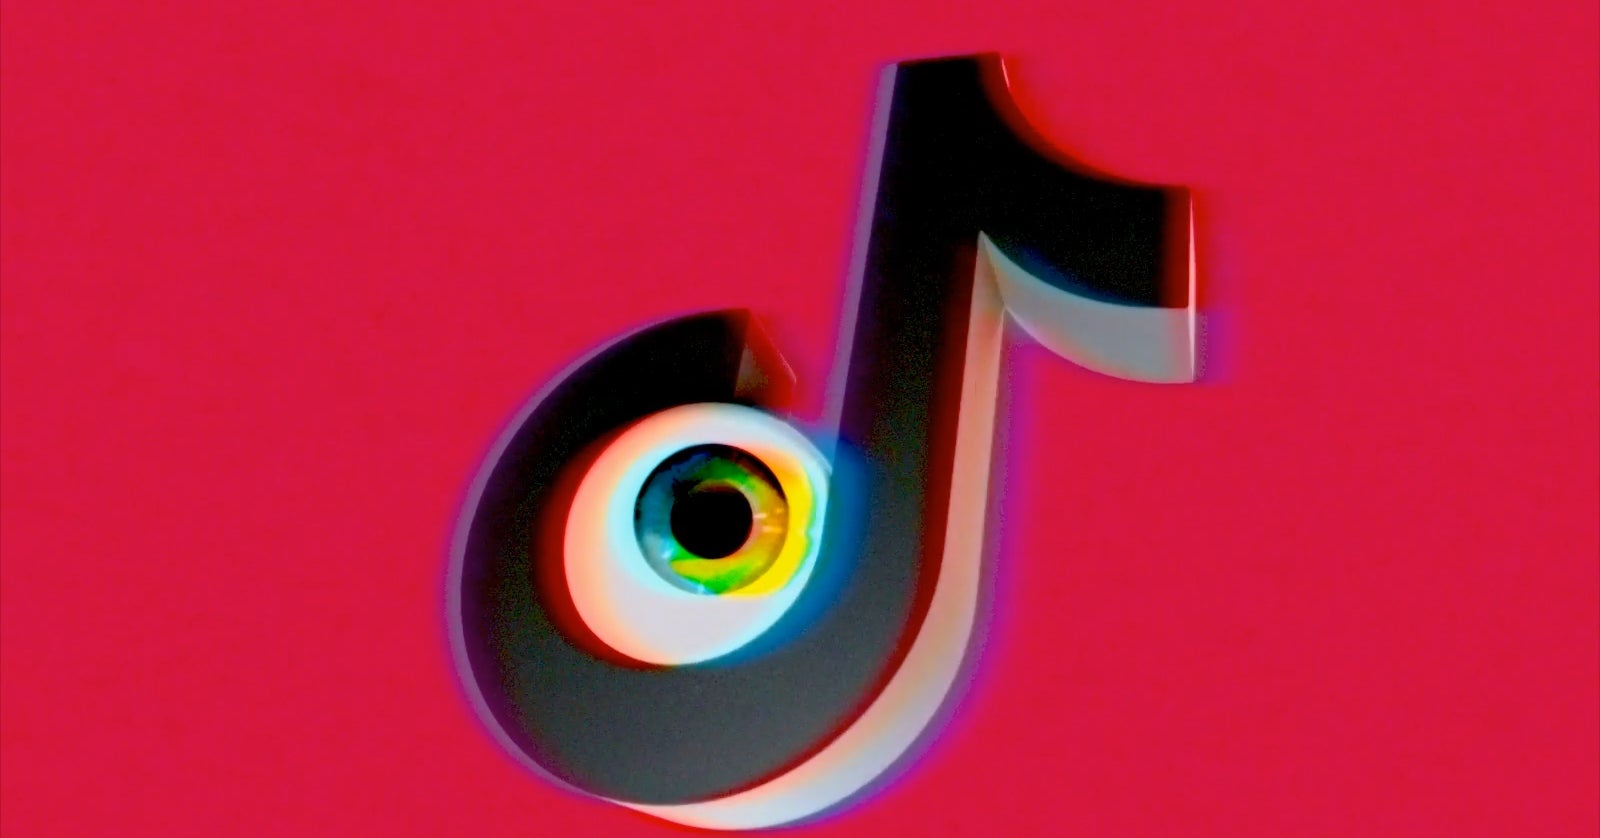 US TikTok Consumer Knowledge Has Been Repeatedly Accessed From China, Leaked Audio Exhibits